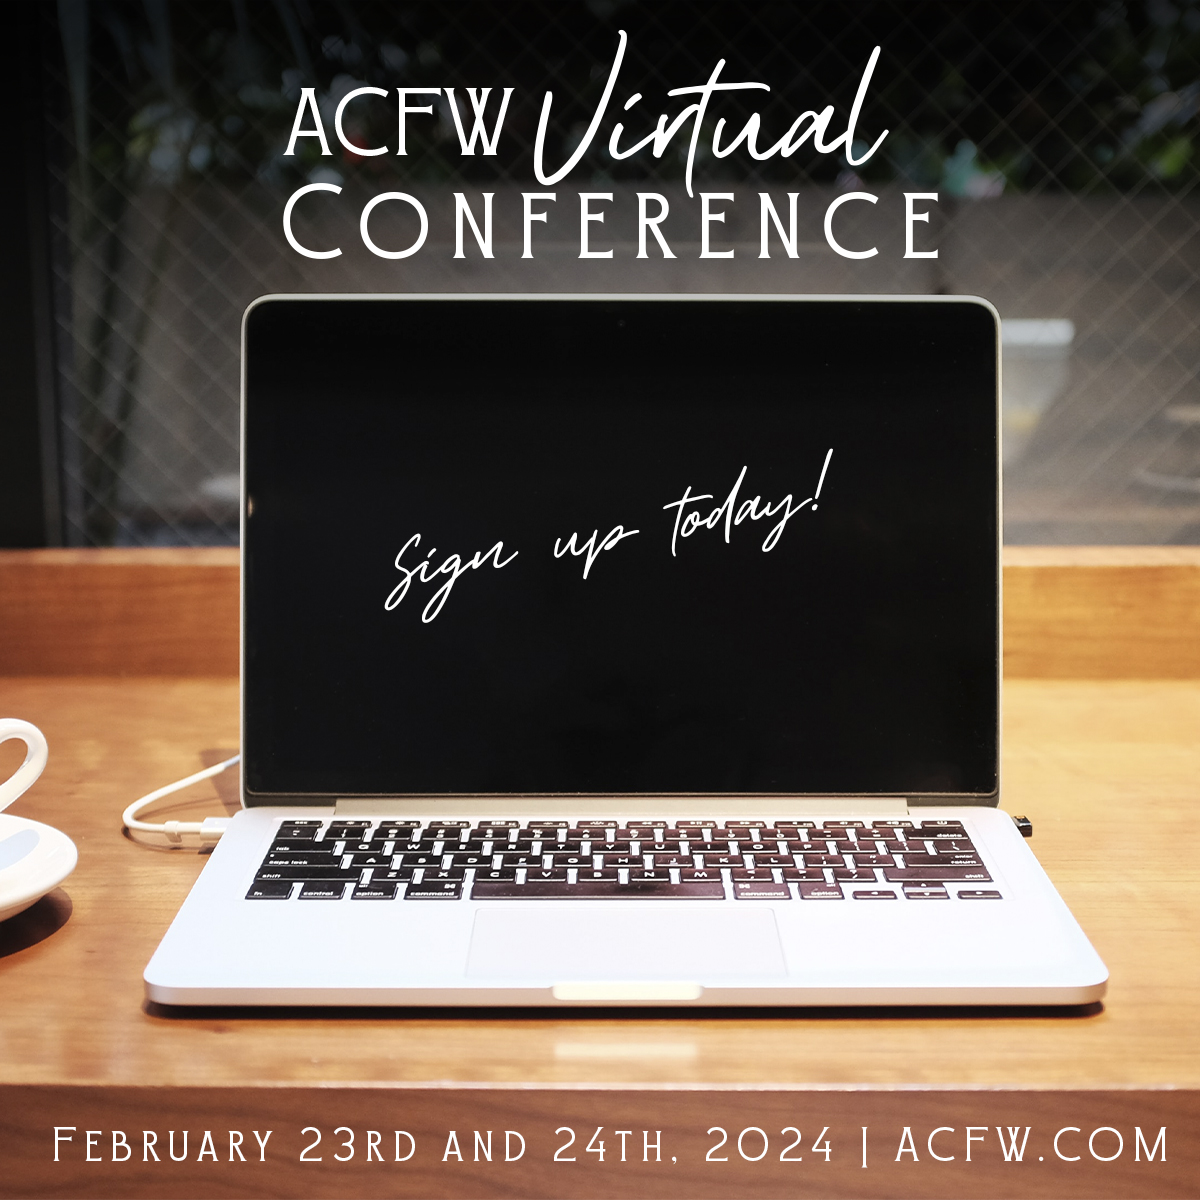 Have you registered for the Virtual Conference 2/23-24/ 2024 yet? ➡️ Over the course of the two days, we’ll offer over a dozen workshops led by leaders in the industry, and appointments with agents, editors, and specialty. acfw.com/acfw-virtual-c… #acfwvirtualconference